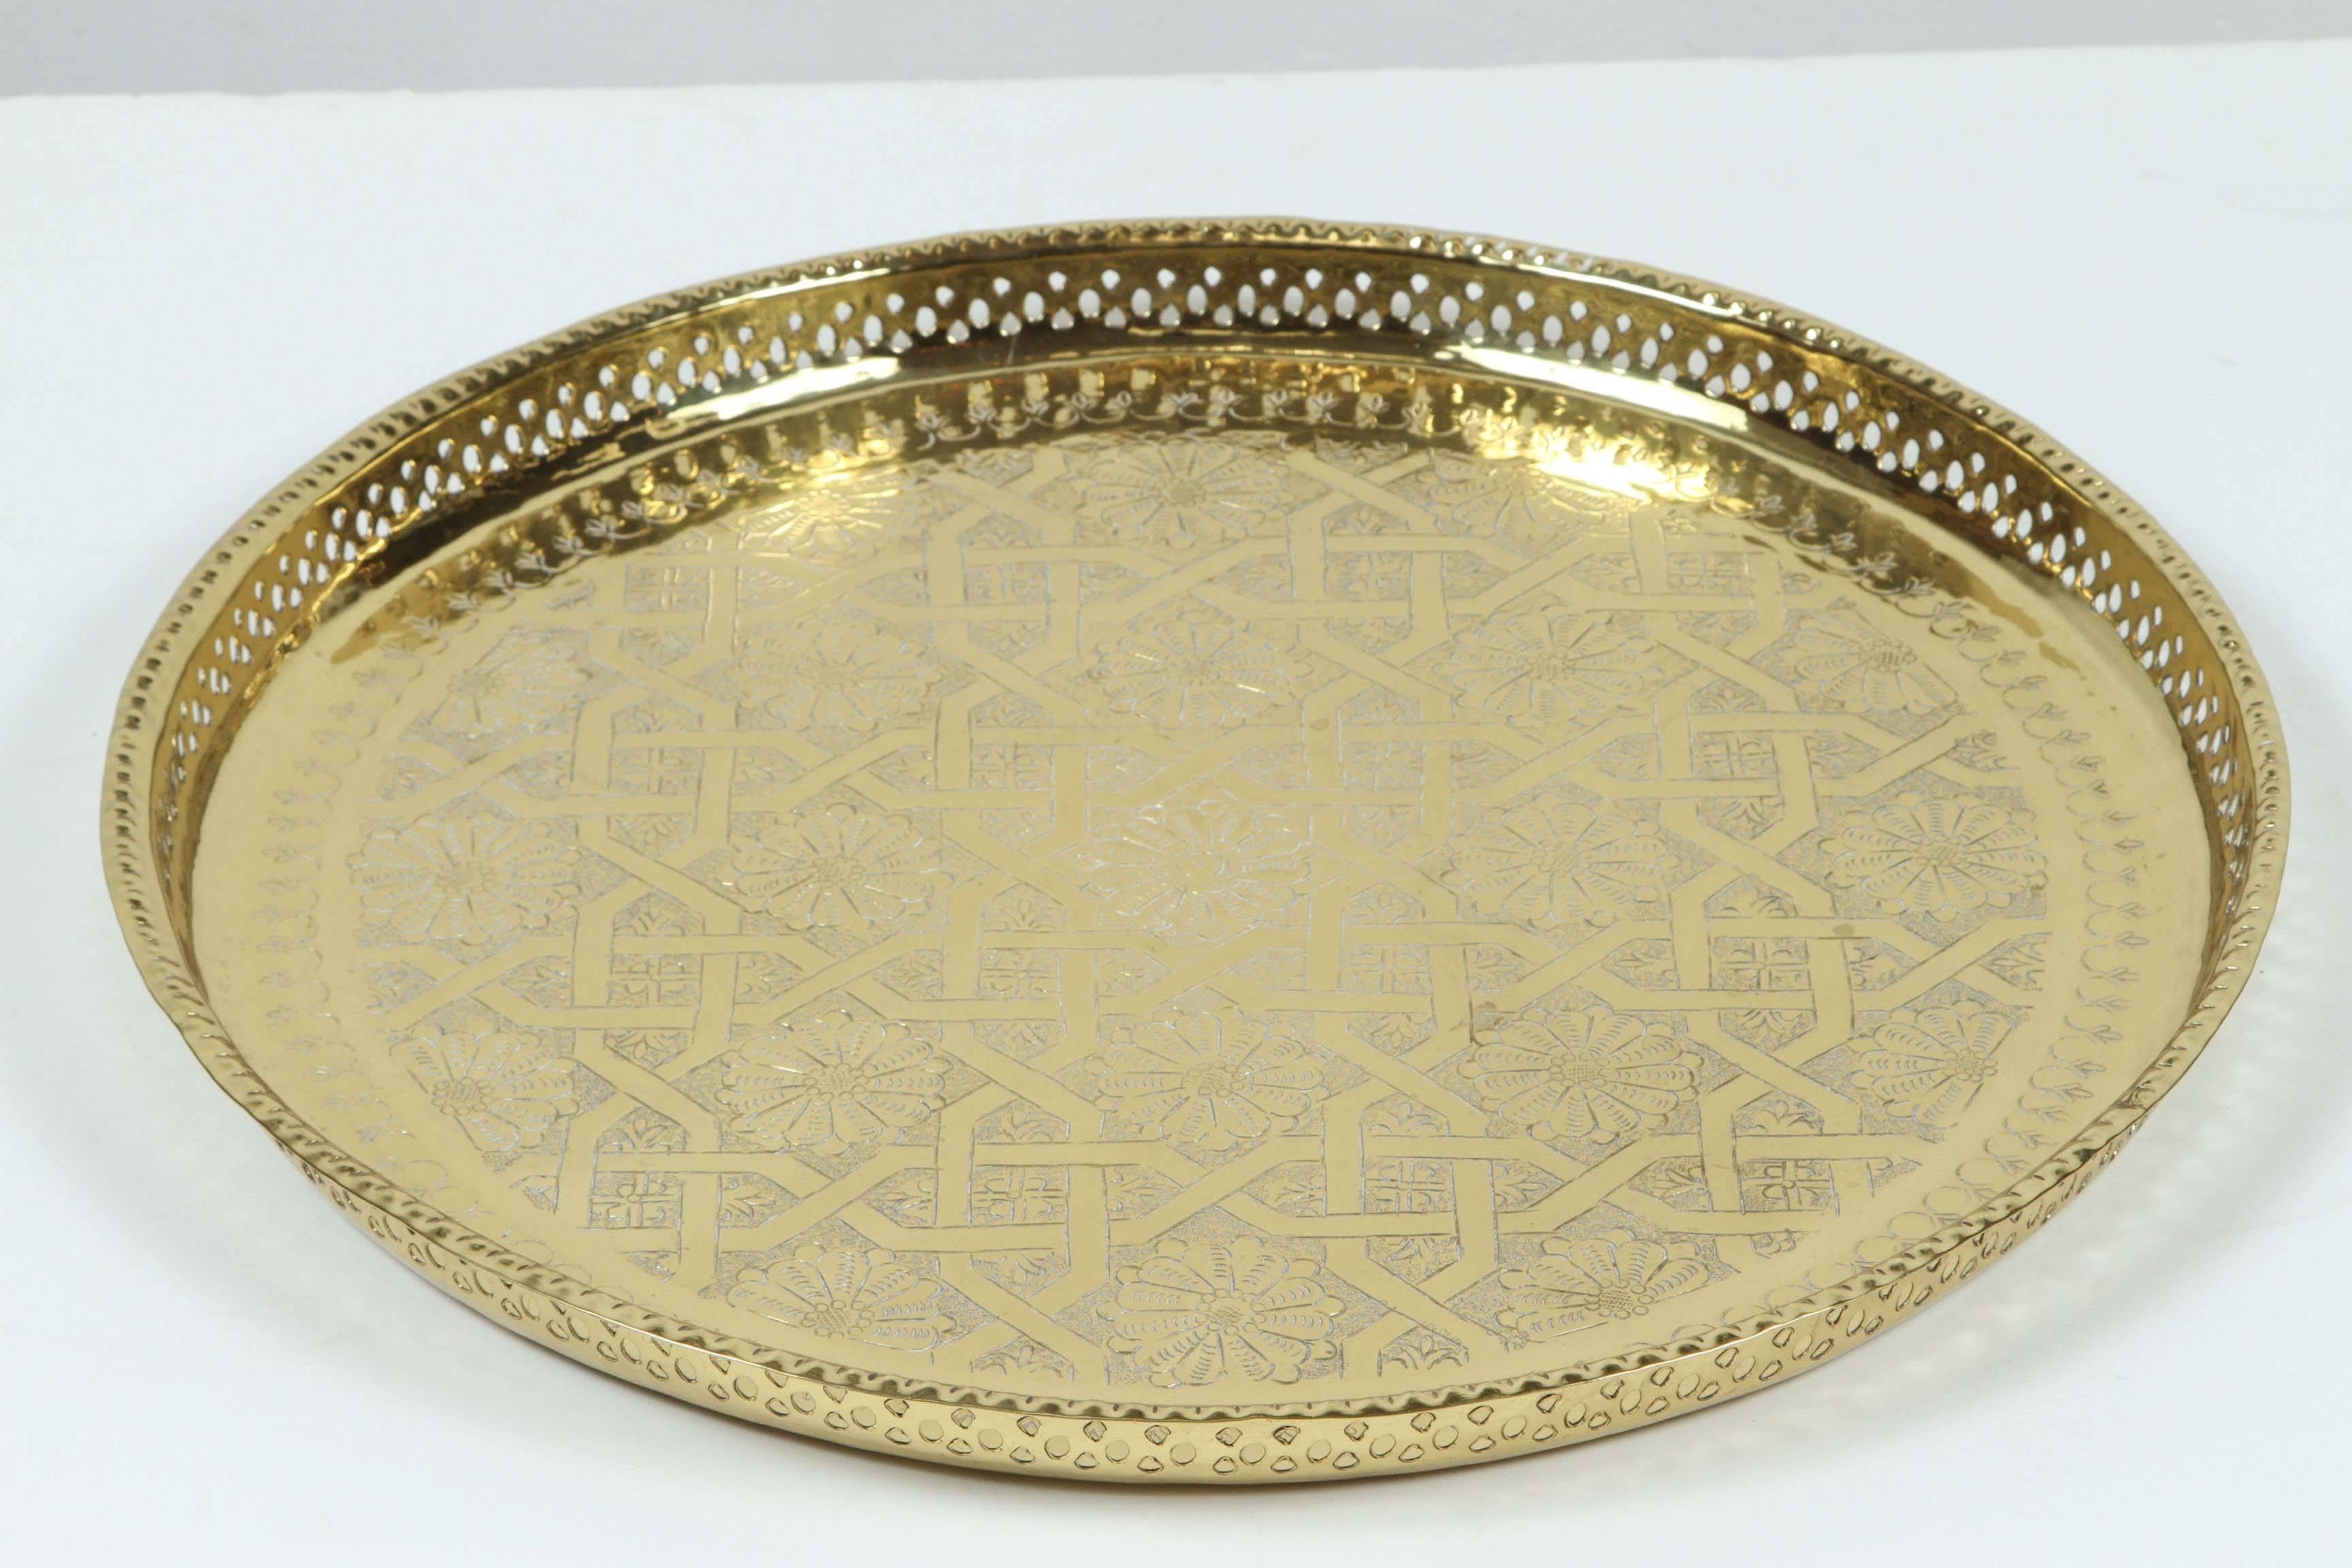 Vintage Moroccan Moorish polished round serving brass tray with traditional geometric designs.
Handcrafted by Master artisans in Fez, hand-hammered using simple tools.
Great brass decorative Islamic art object.